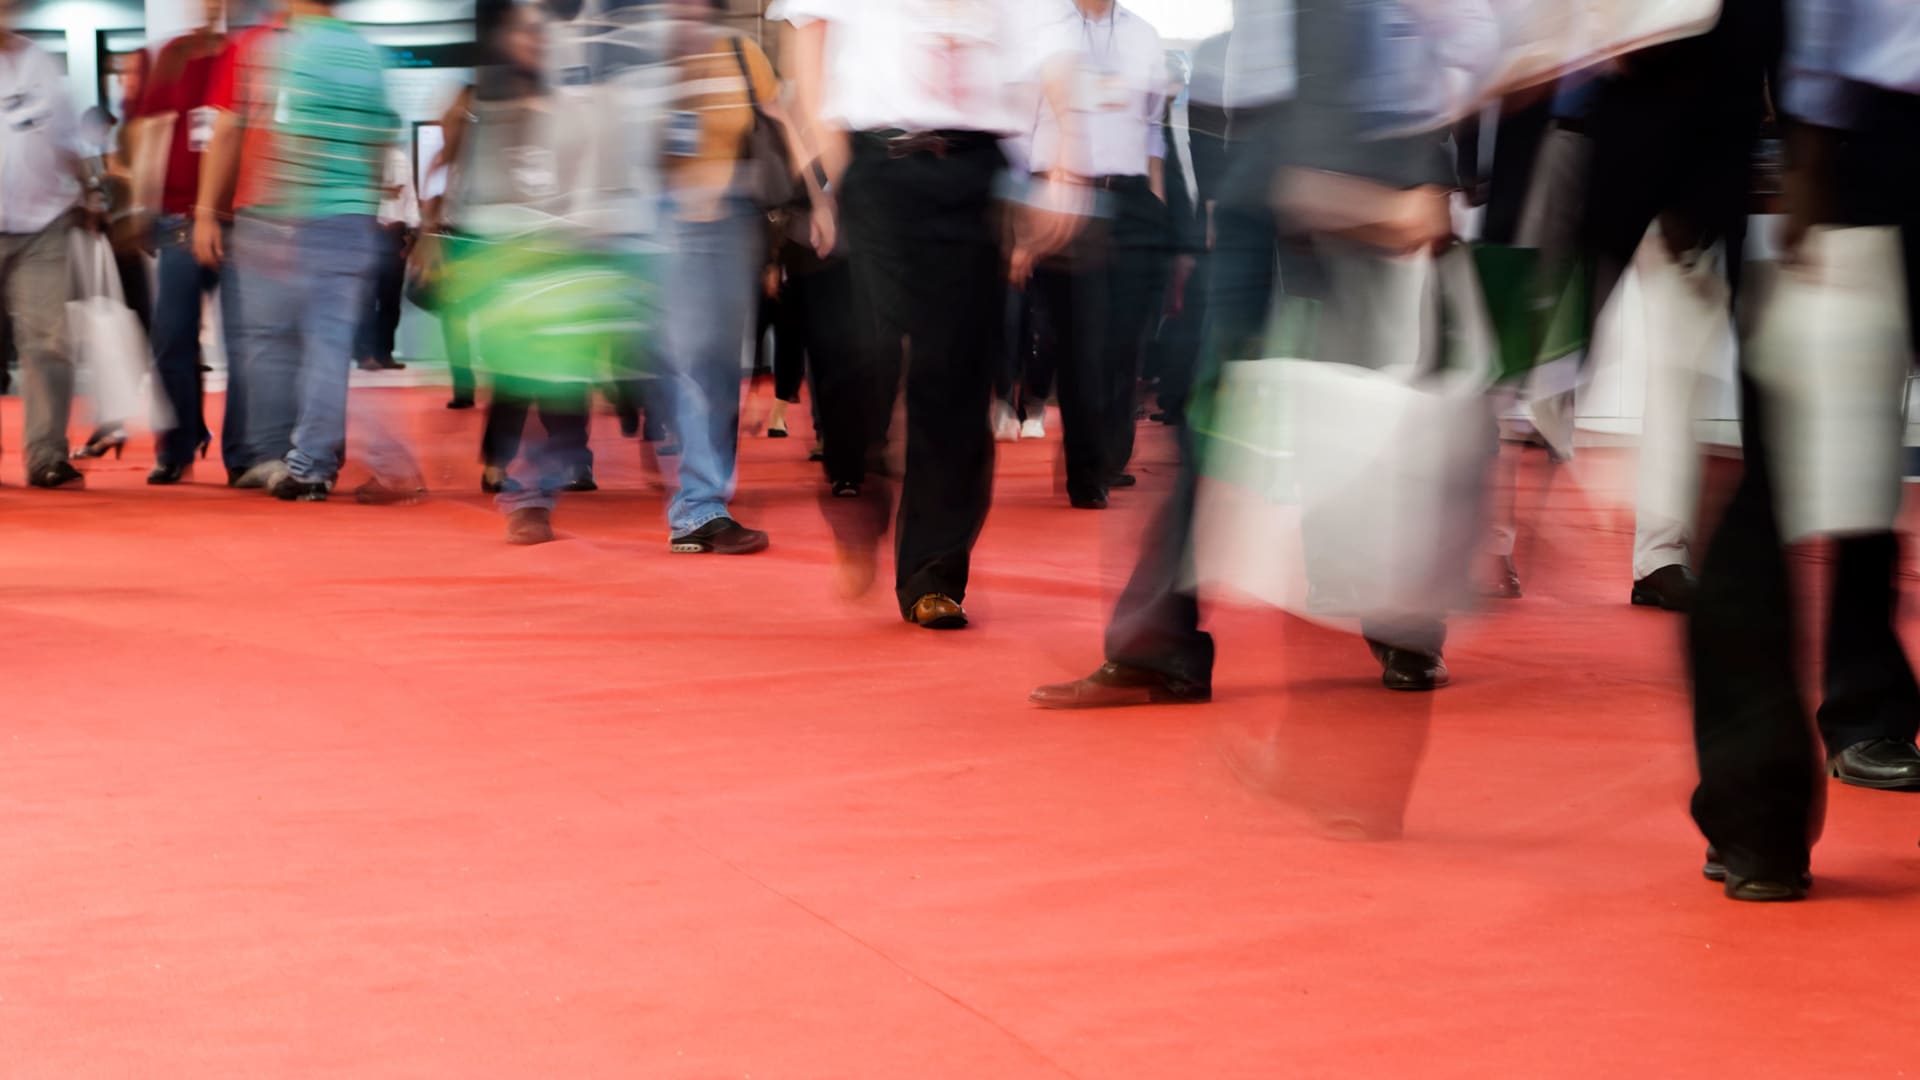 What You Need to Know About the Future of Trade Shows